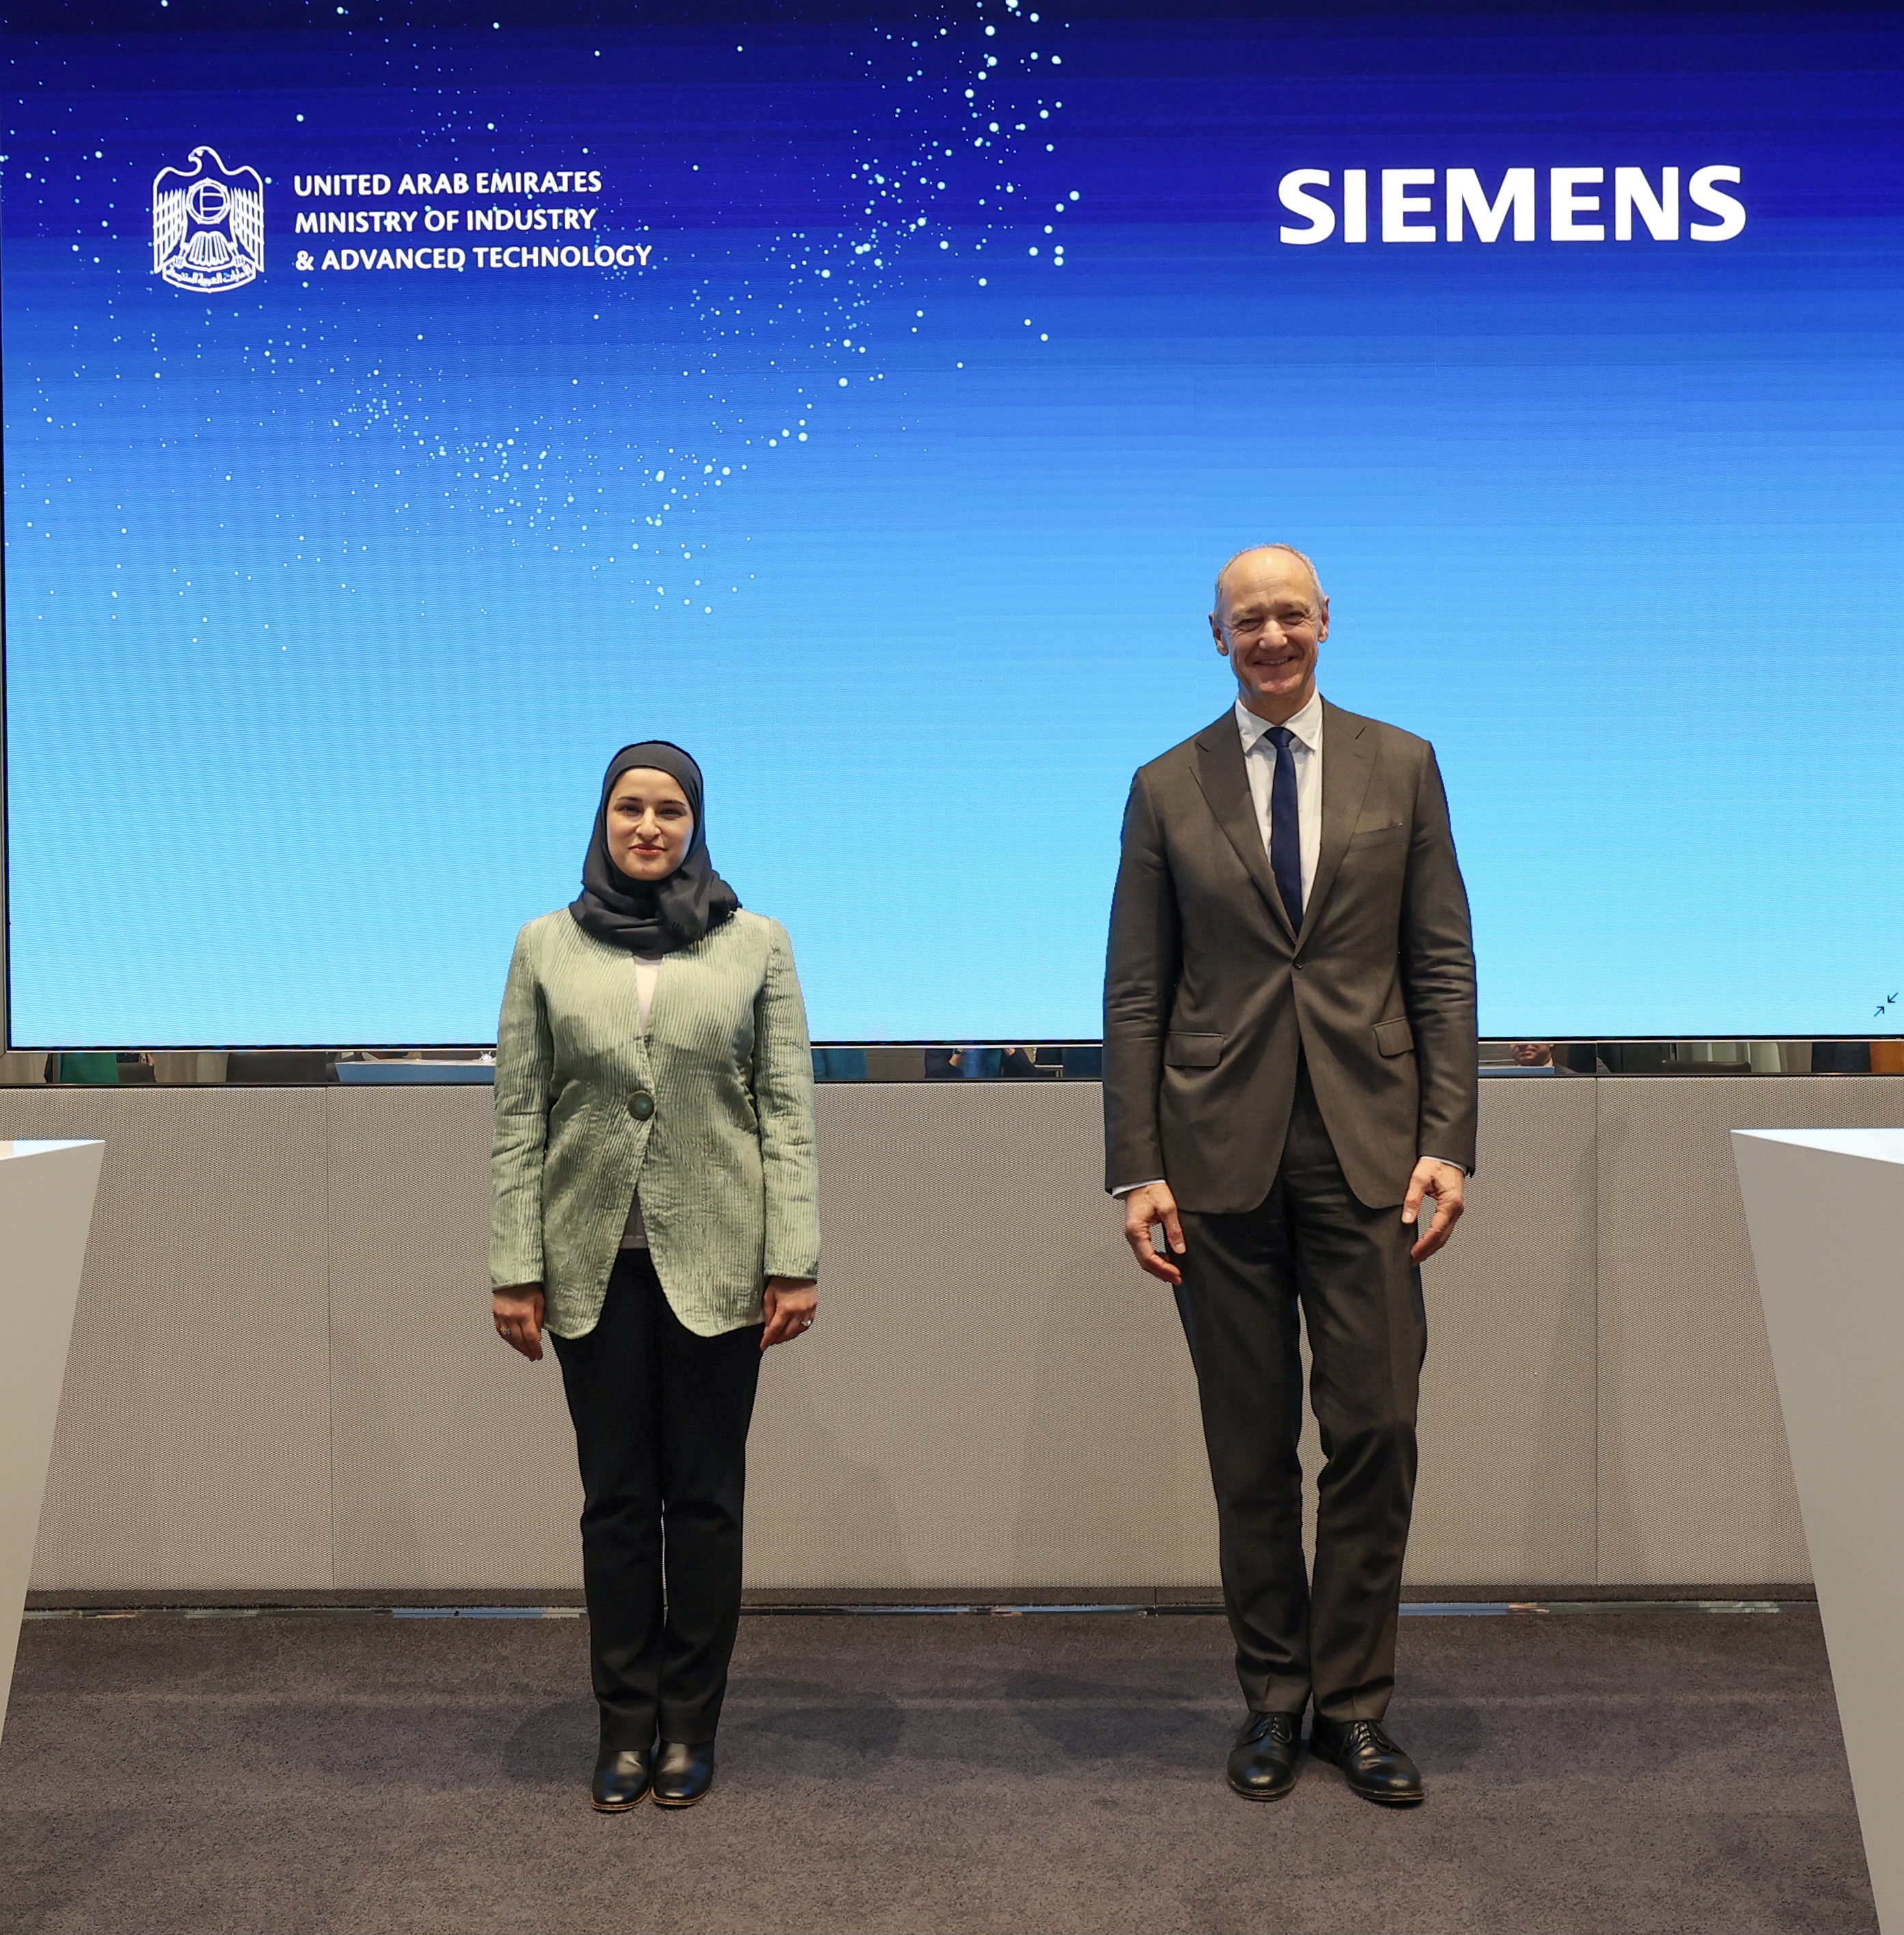 Ministry of Industry and Advanced Technology and Siemens join forces to accelerate the digital transformation of the UAE industrial sector